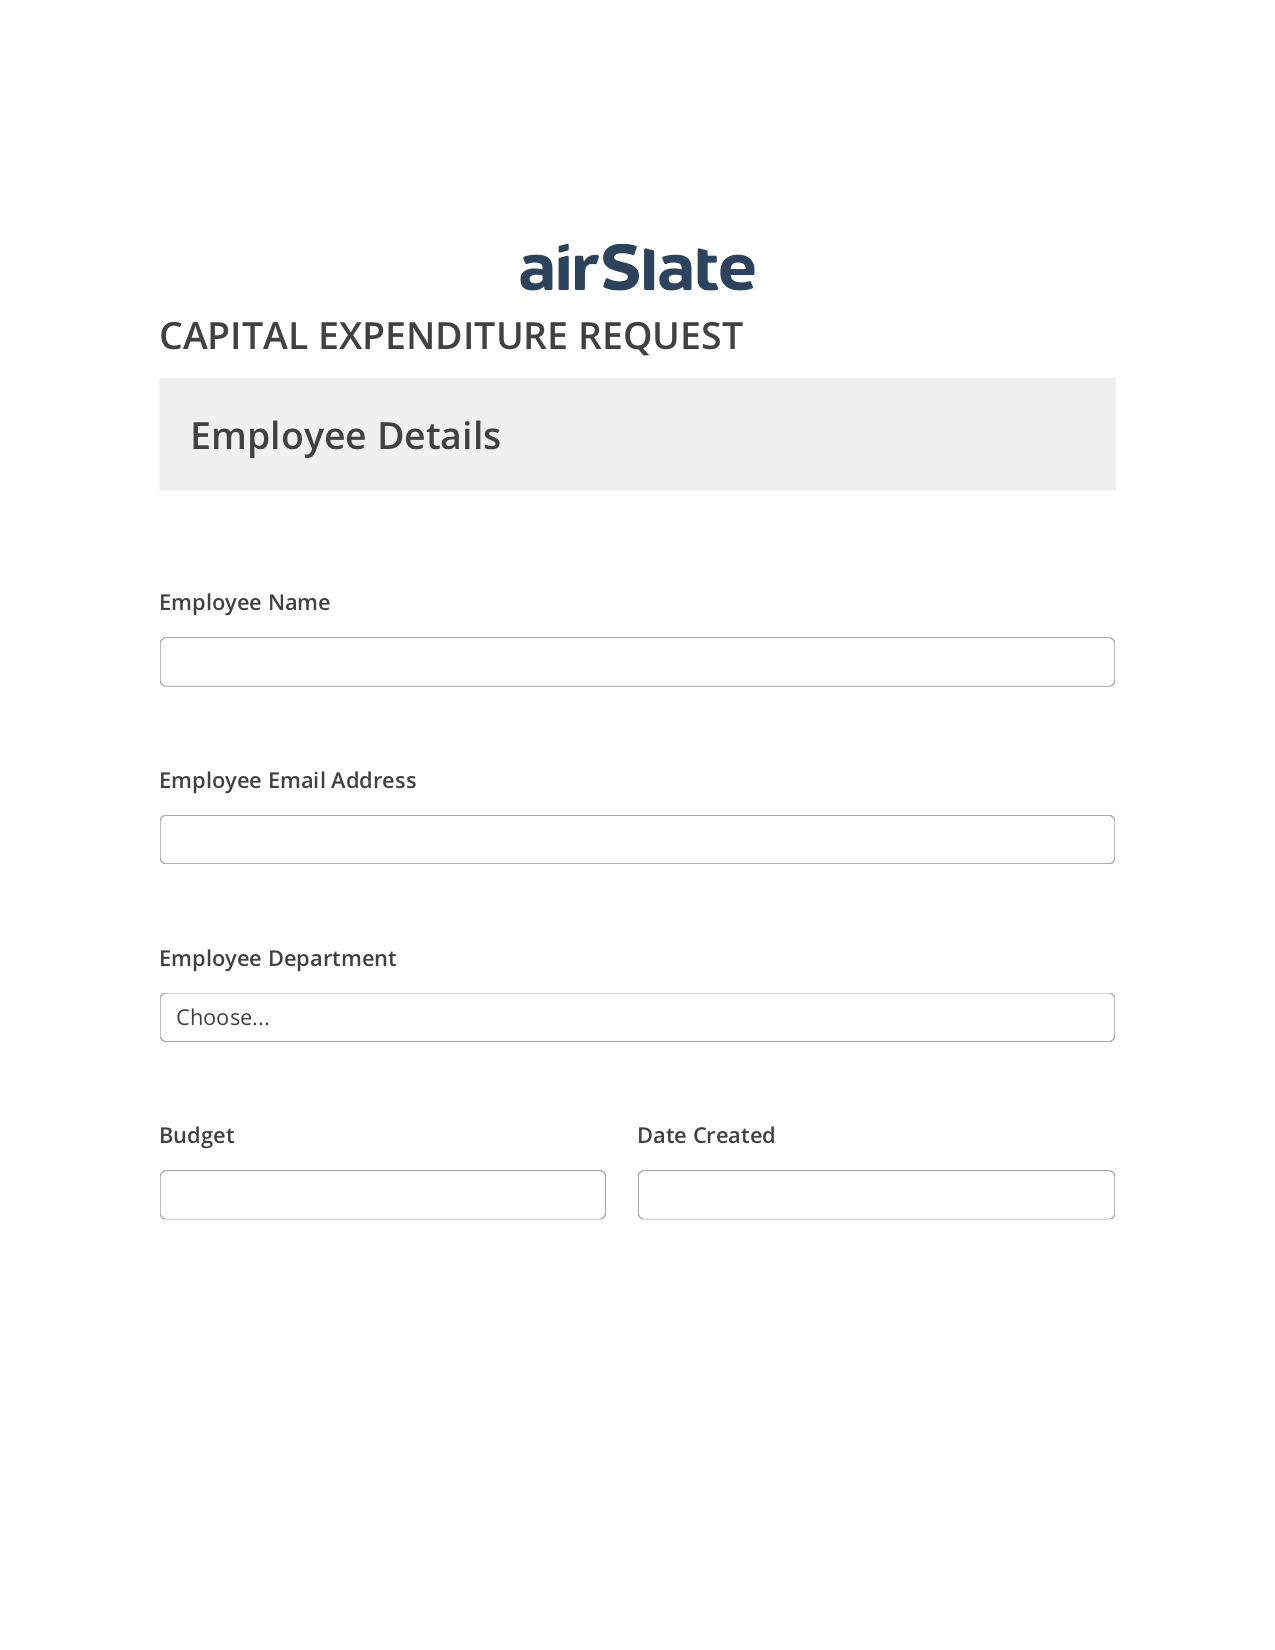 Capital Expenditure Request Approval Workflow System Bot - Slack Two-Way Binding Bot, Update Audit Trail Bot, Archive to OneDrive Bot